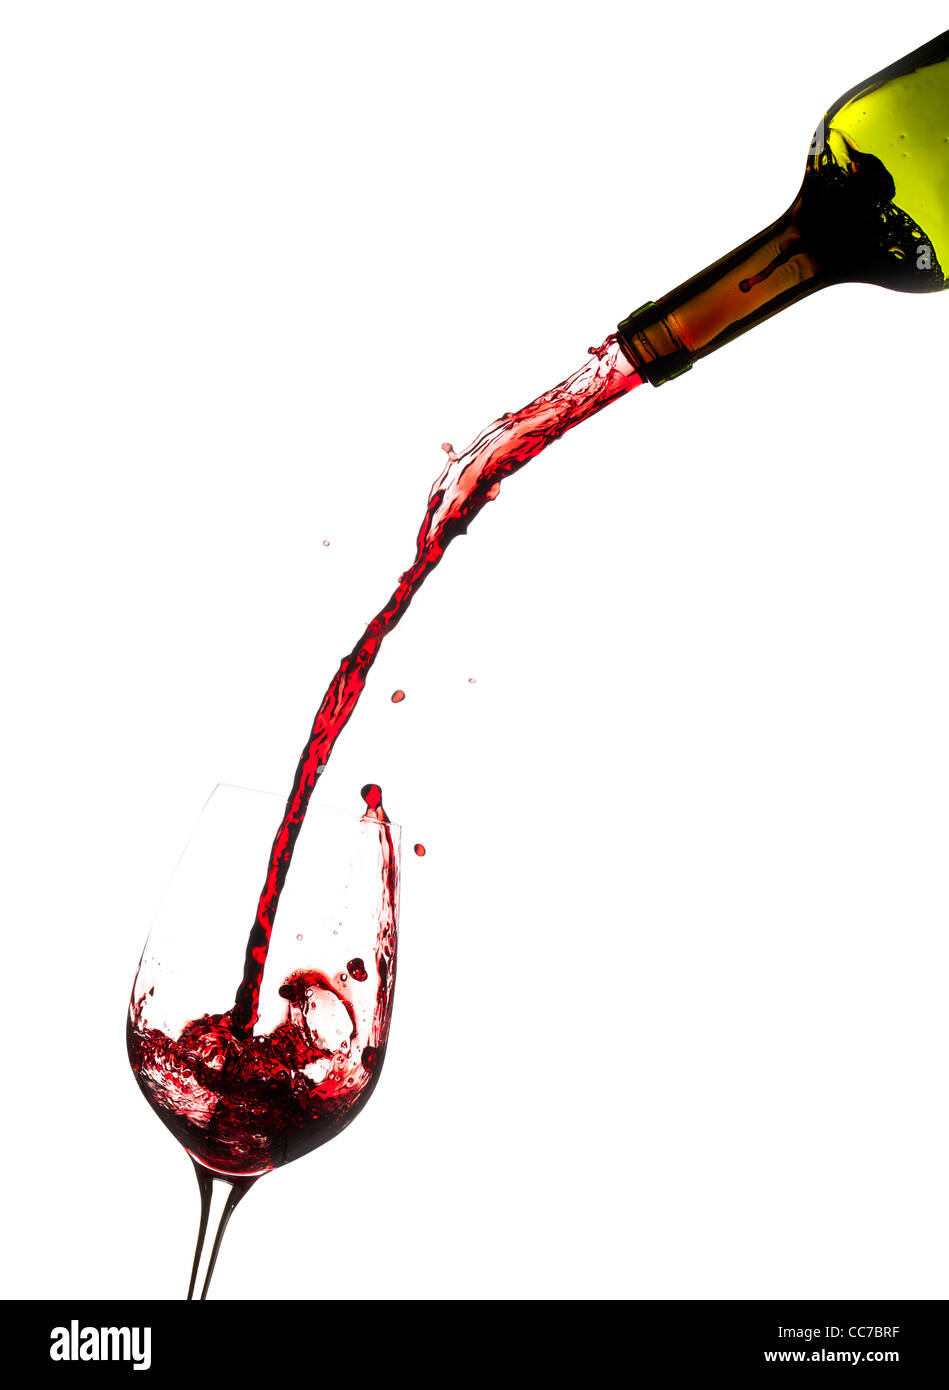 https://c8.alamy.com/comp/CC7BRF/red-wine-being-poured-rapidly-directly-from-the-bottle-into-a-large-CC7BRF.jpg